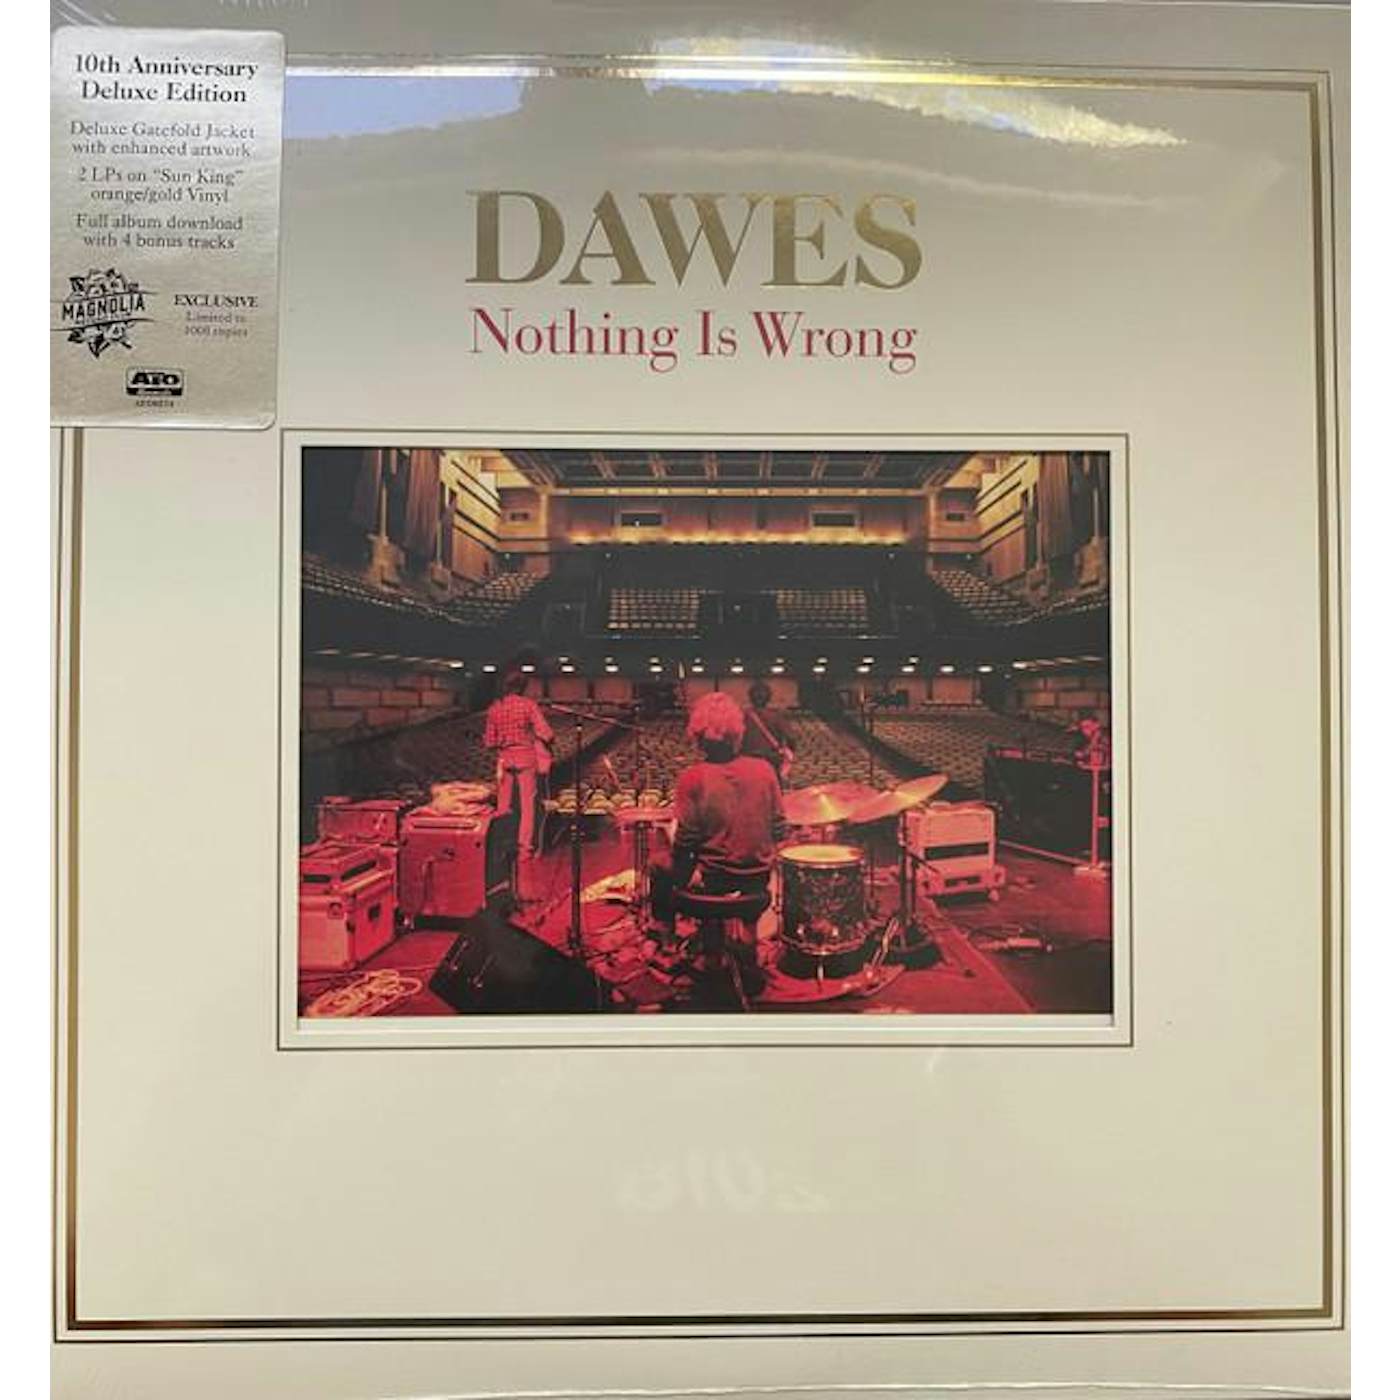 Dawes NOTHING IS WRONG (10TH ANNIVERSARY DELUXE EDITION/GOLD/SILVER/BLACK SWIRL VINYL) Vinyl Record